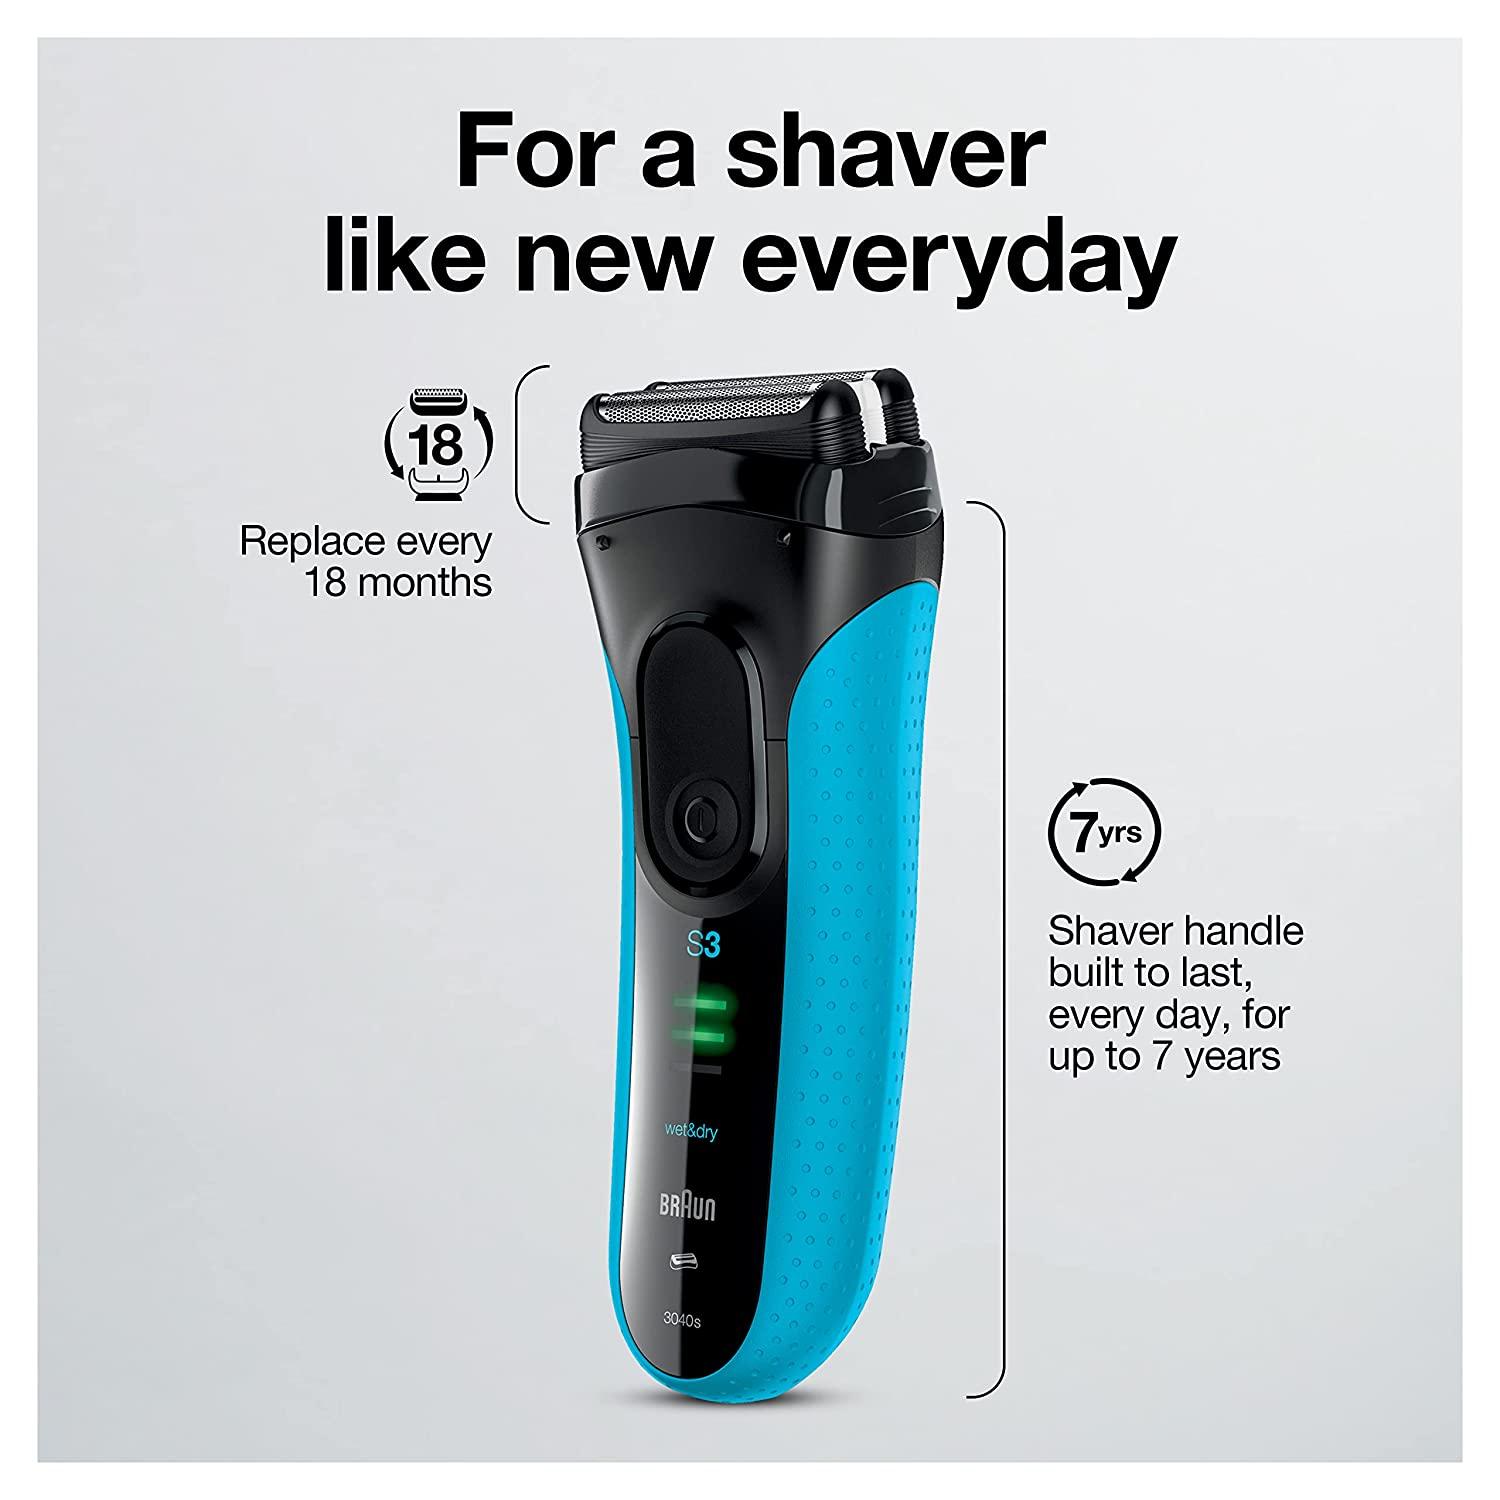 Braun Series 3 Rechargeable Electric Shaver, Wet and Dry - eXtra